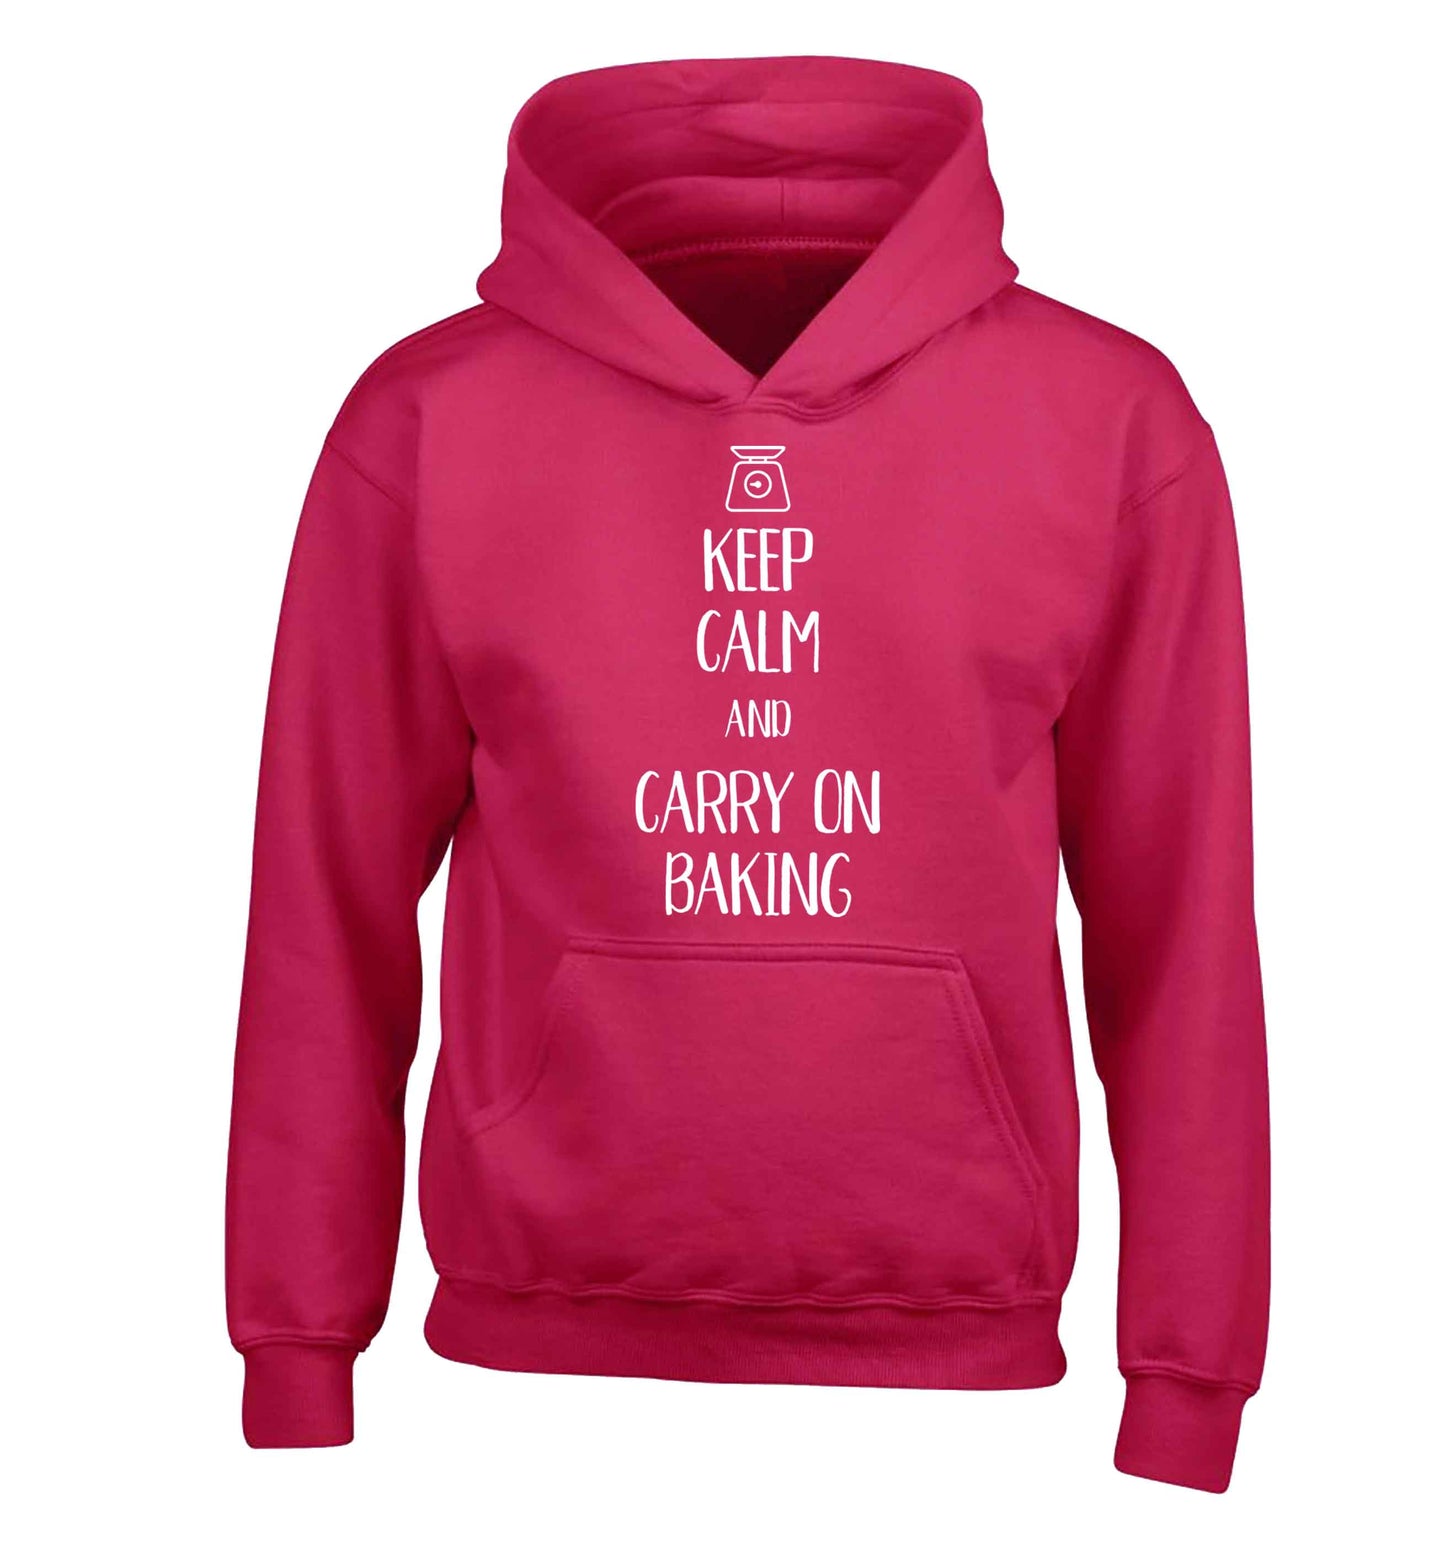 Keep calm and carry on baking children's pink hoodie 12-13 Years